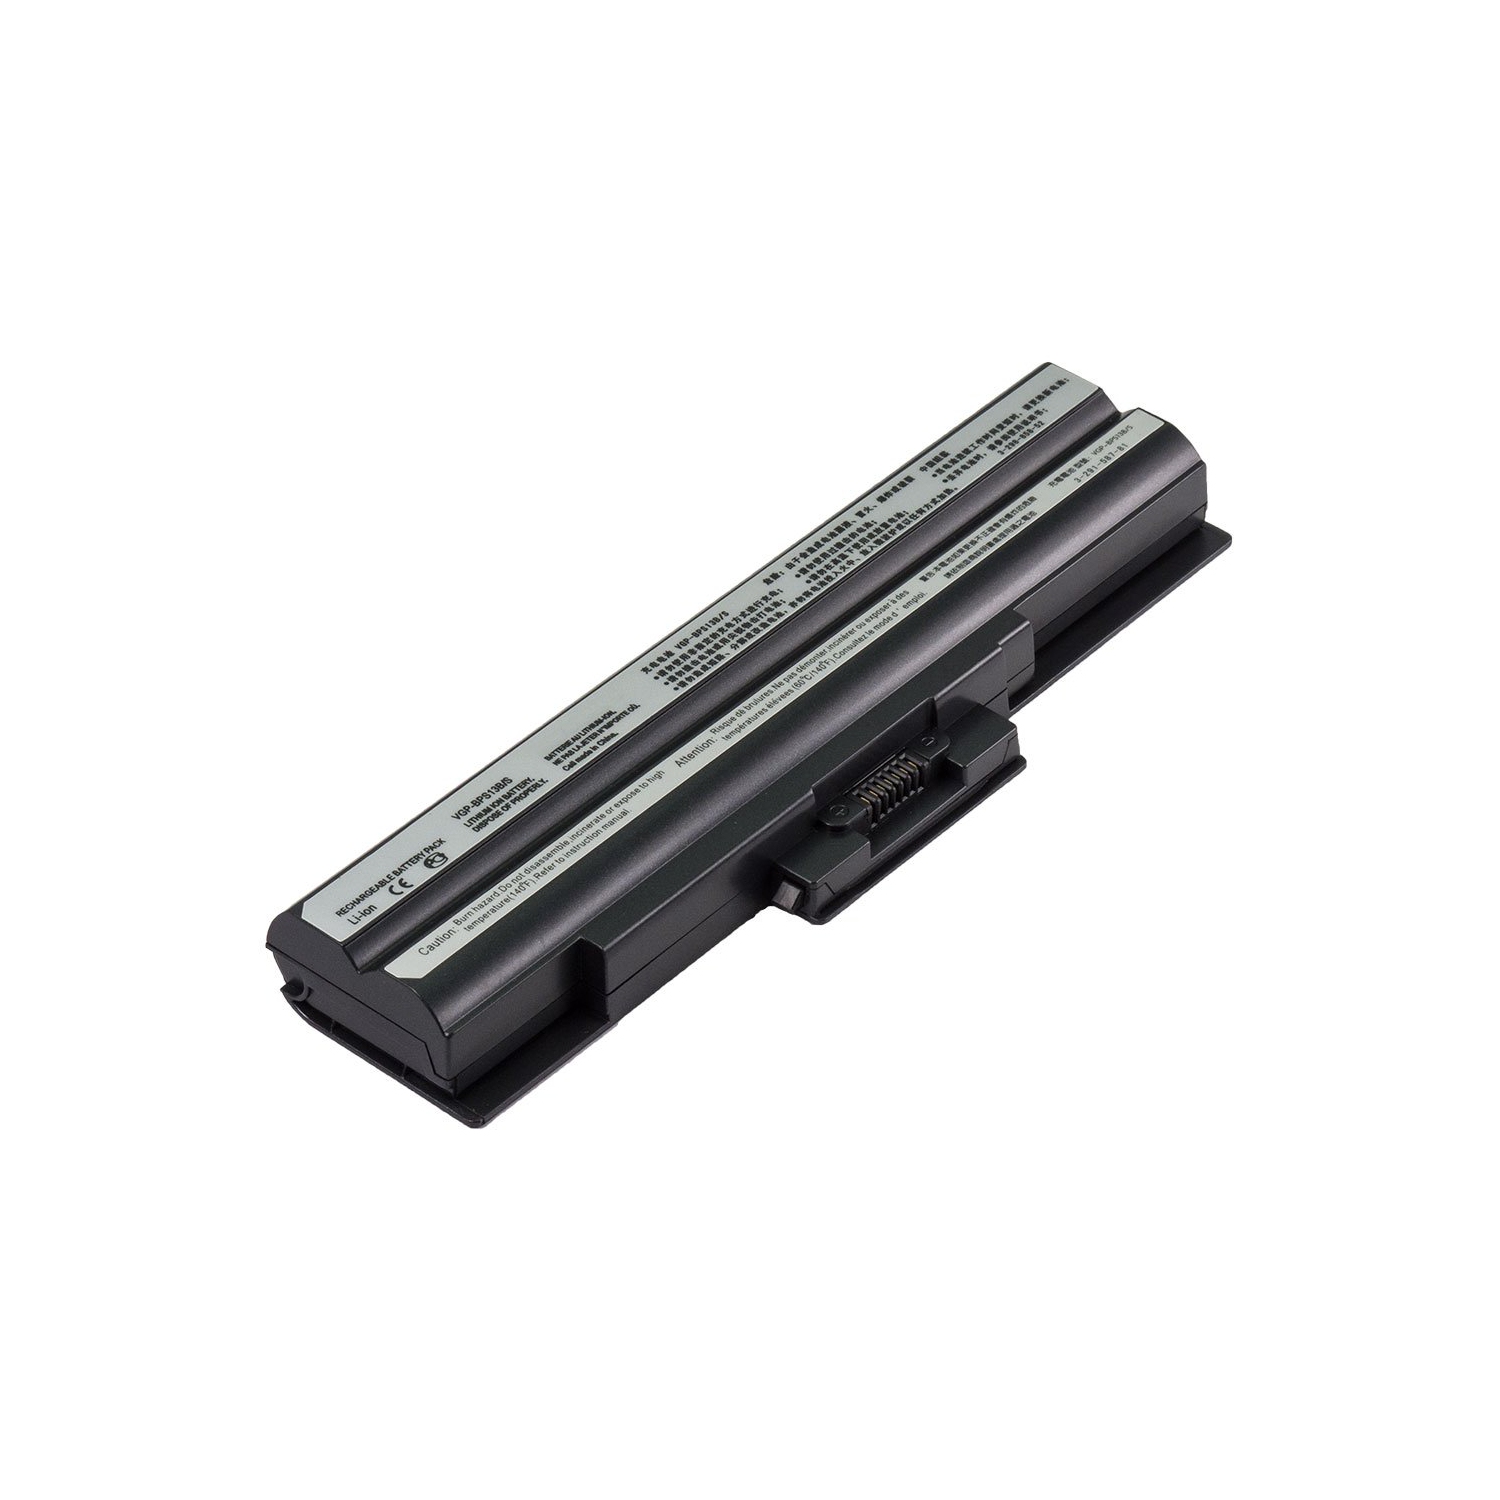 Laptop Battery Replacement for Sony VAIO VGN-FW130 Series, VGP-BPS13, VGP-BPS13/S, VGP-BPS13A/Q, VGP-BPS13B/B, VGP-BSP13/S